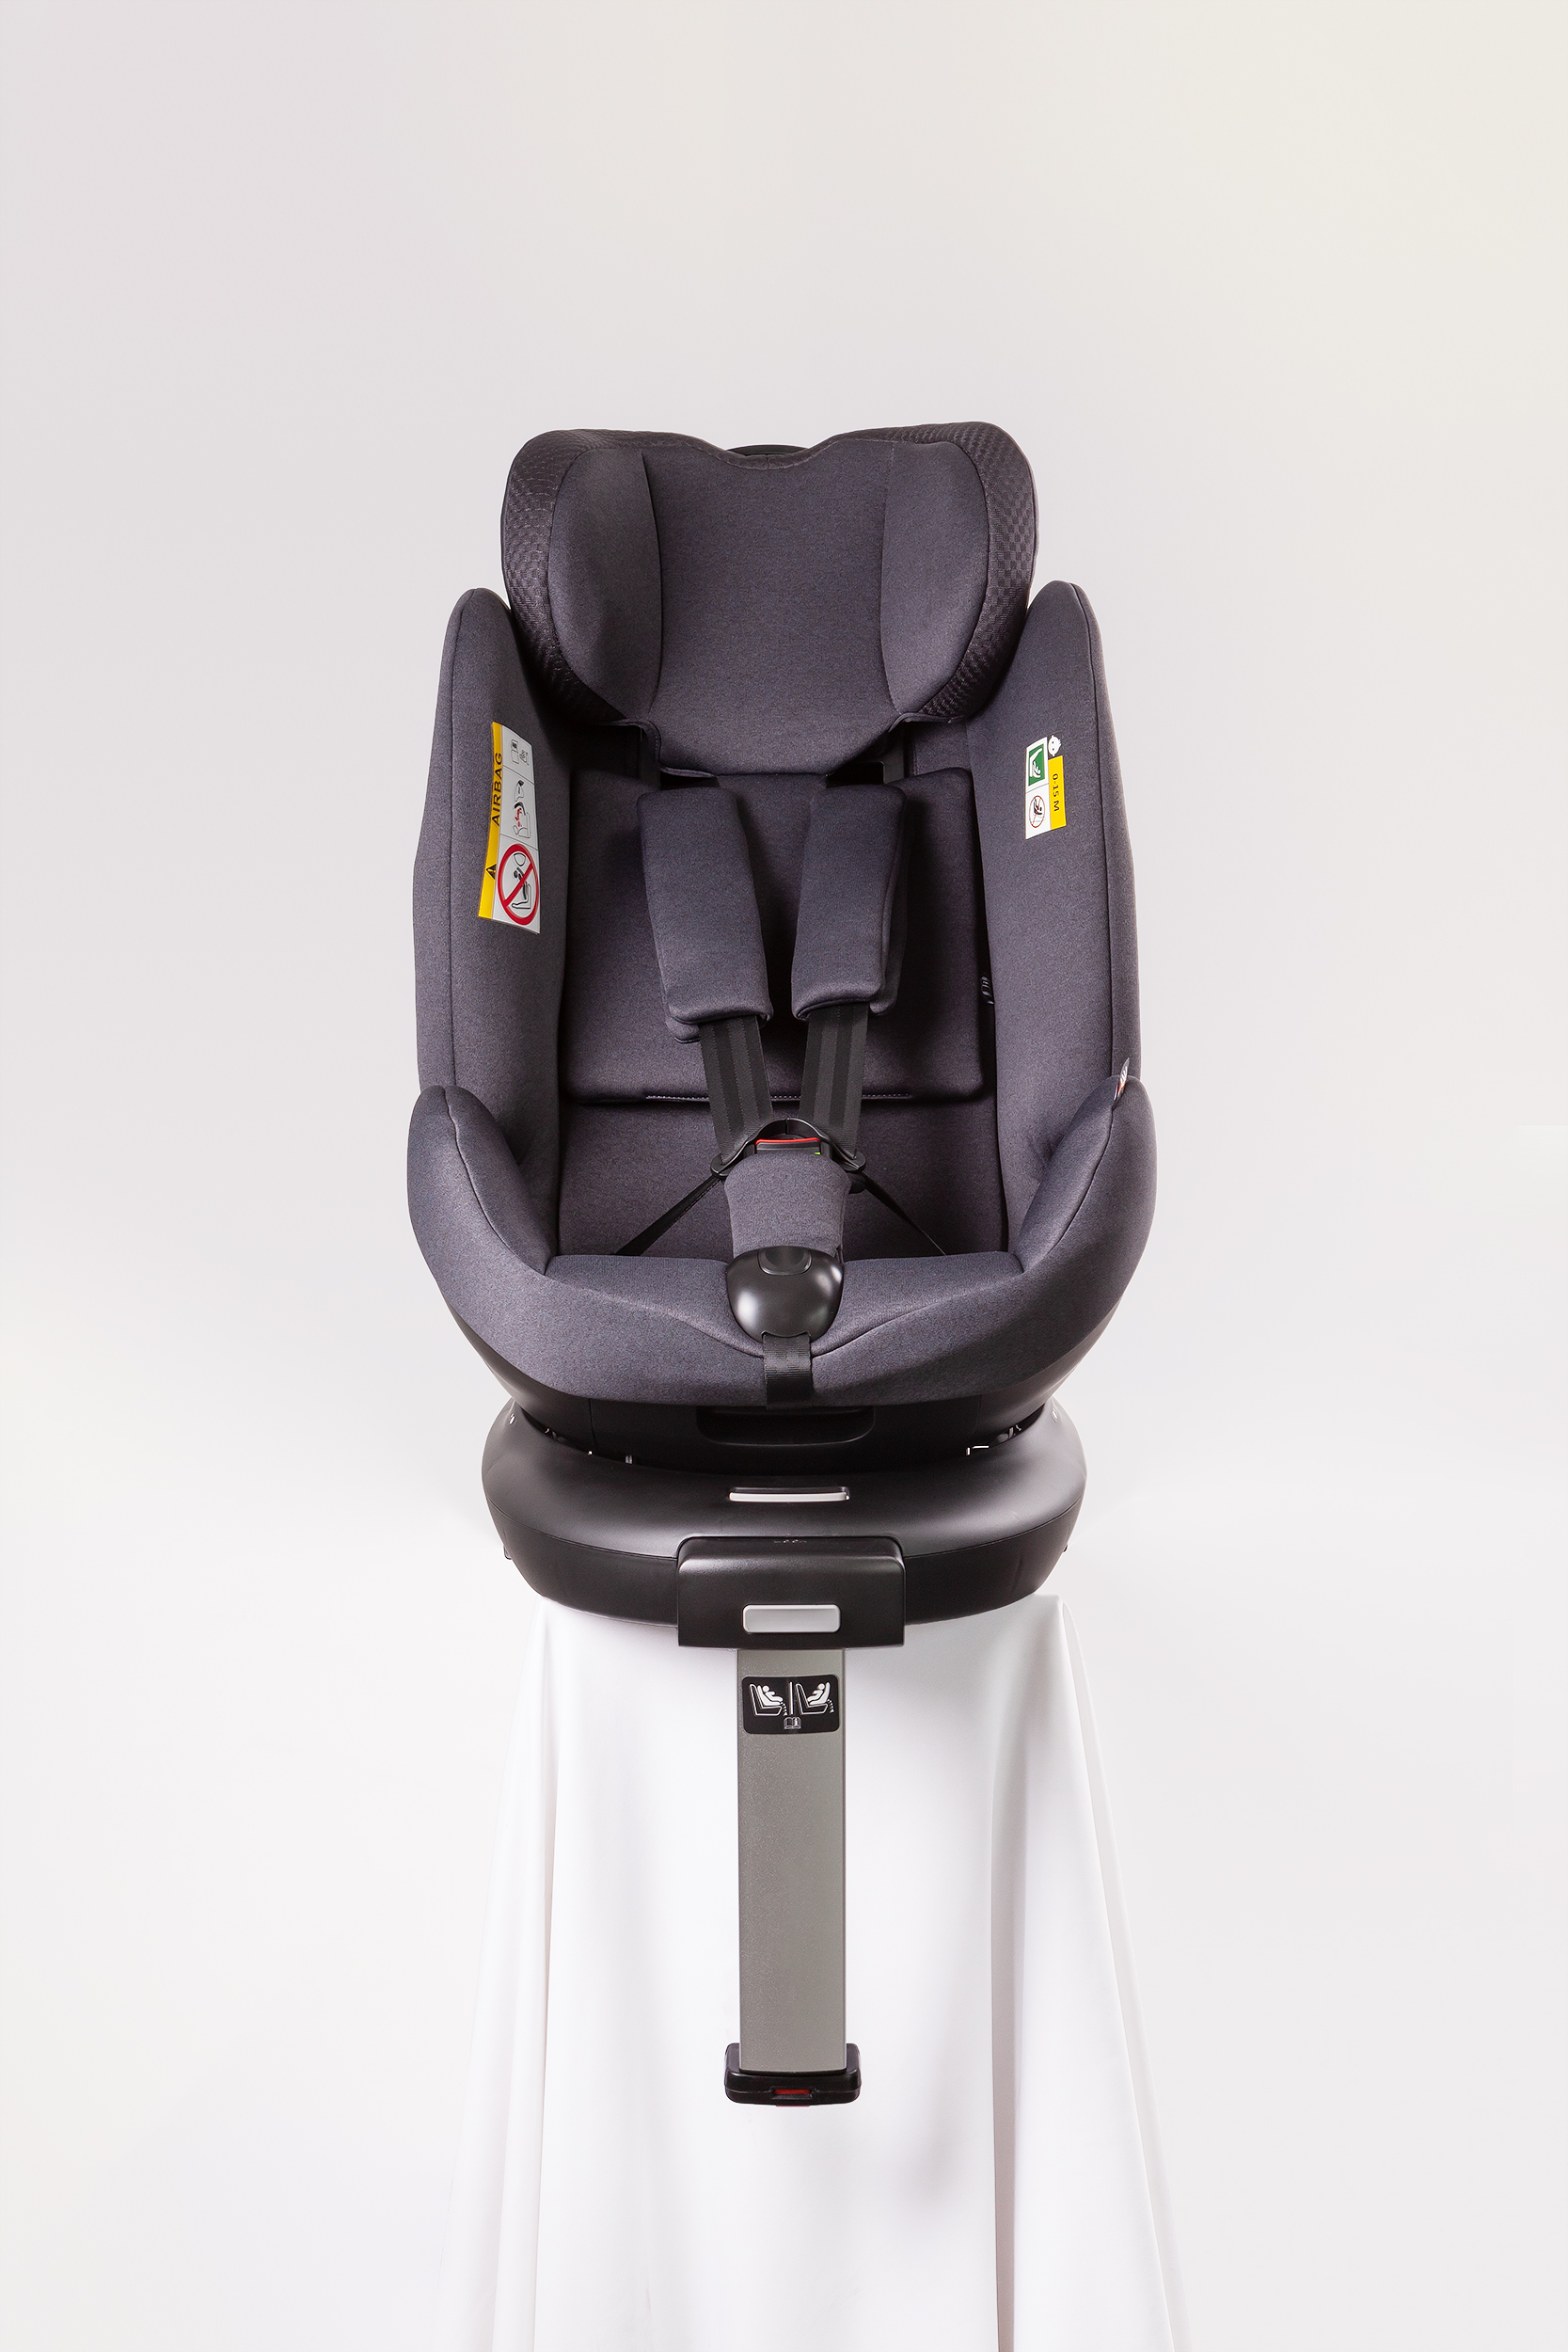 R44 child car seat for sale